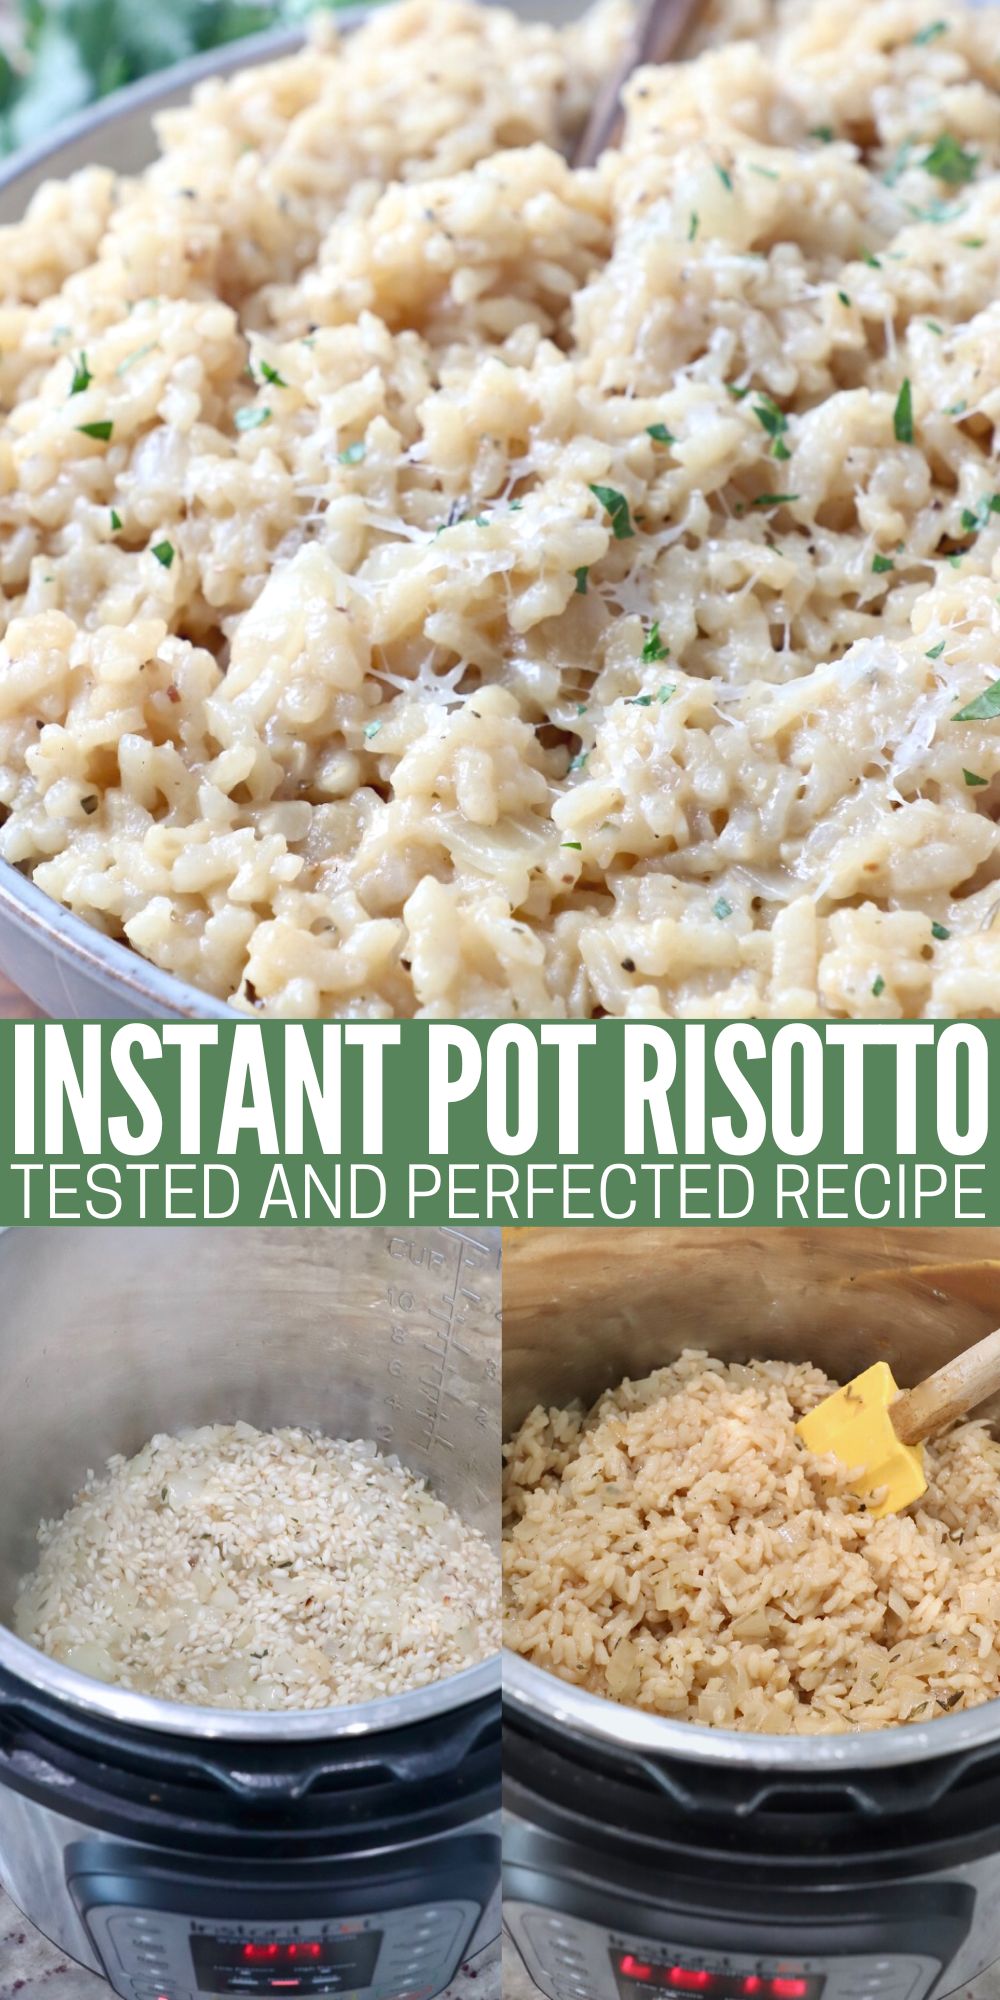 Instant Pot Risotto with Parmesan - WhitneyBond.com